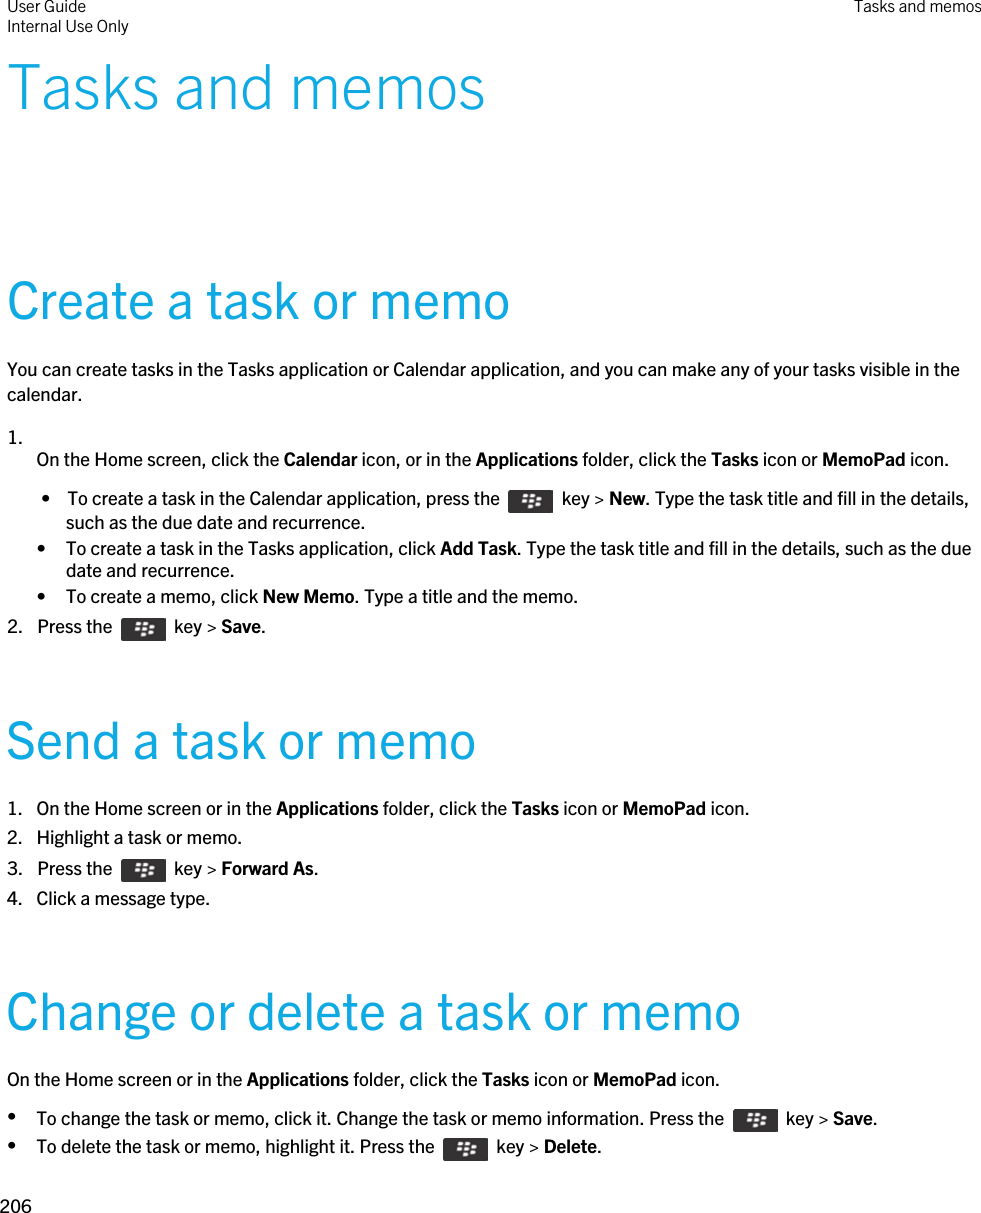 Tasks and memosCreate a task or memoYou can create tasks in the Tasks application or Calendar application, and you can make any of your tasks visible in the calendar.1.  On the Home screen, click the Calendar icon, or in the Applications folder, click the Tasks icon or MemoPad icon. •  To create a task in the Calendar application, press the    key &gt; New. Type the task title and fill in the details, such as the due date and recurrence.• To create a task in the Tasks application, click Add Task. Type the task title and fill in the details, such as the due date and recurrence.• To create a memo, click New Memo. Type a title and the memo.2.  Press the    key &gt; Save. Send a task or memo1. On the Home screen or in the Applications folder, click the Tasks icon or MemoPad icon.2. Highlight a task or memo.3.  Press the    key &gt; Forward As.4. Click a message type.Change or delete a task or memoOn the Home screen or in the Applications folder, click the Tasks icon or MemoPad icon.•To change the task or memo, click it. Change the task or memo information. Press the    key &gt; Save.•To delete the task or memo, highlight it. Press the    key &gt; Delete.User GuideInternal Use Only Tasks and memos206 